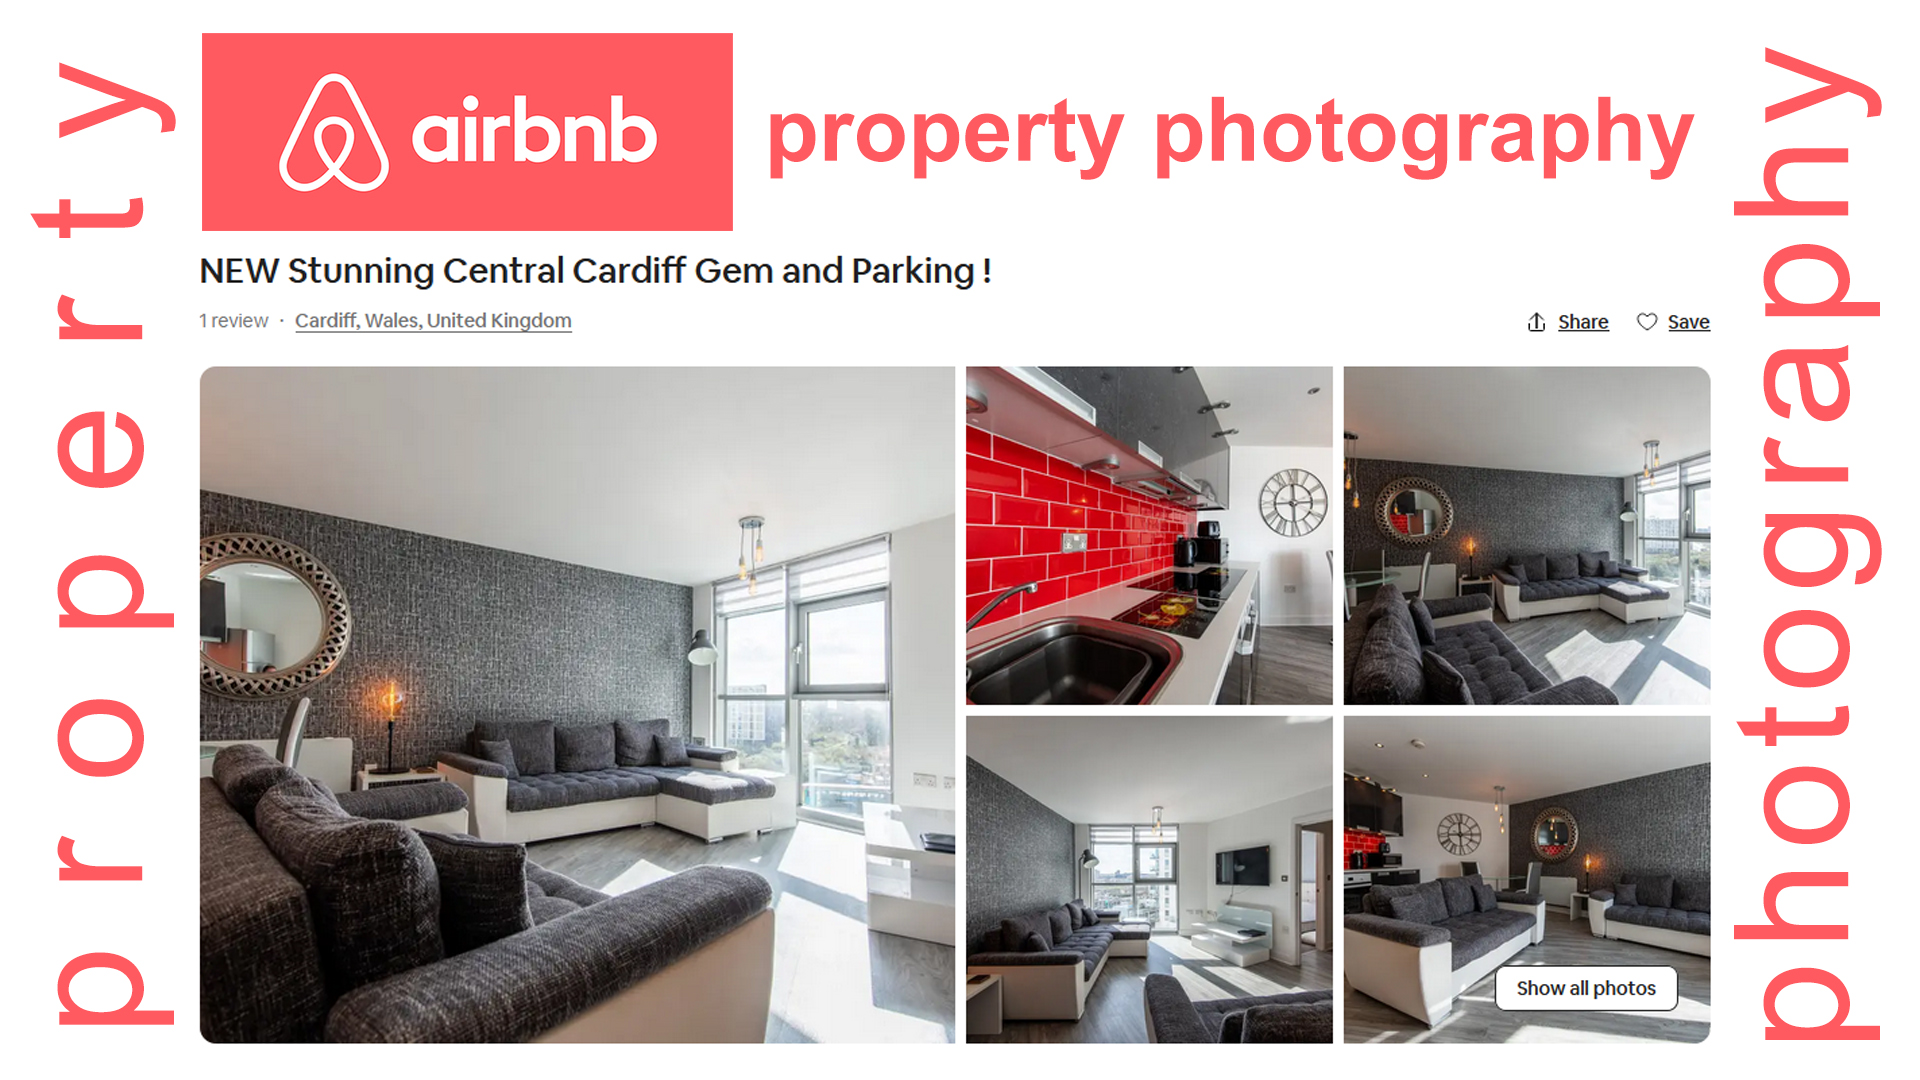 Airbnb property photography